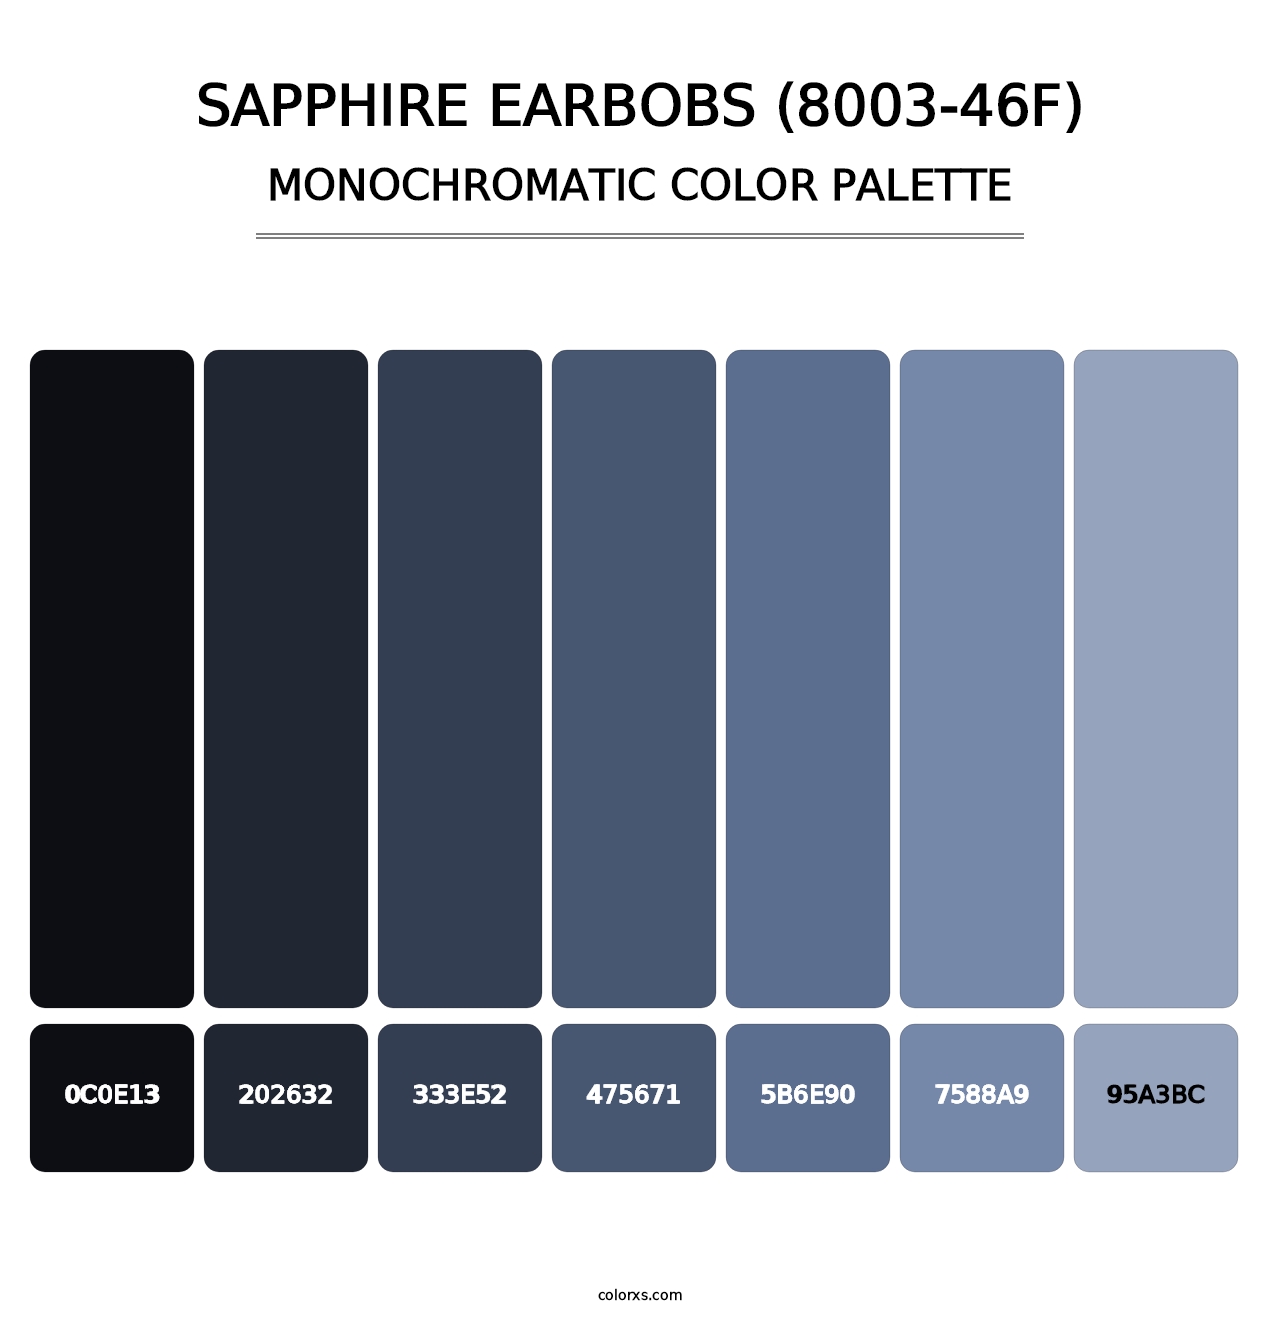 Sapphire Earbobs (8003-46F) - Monochromatic Color Palette